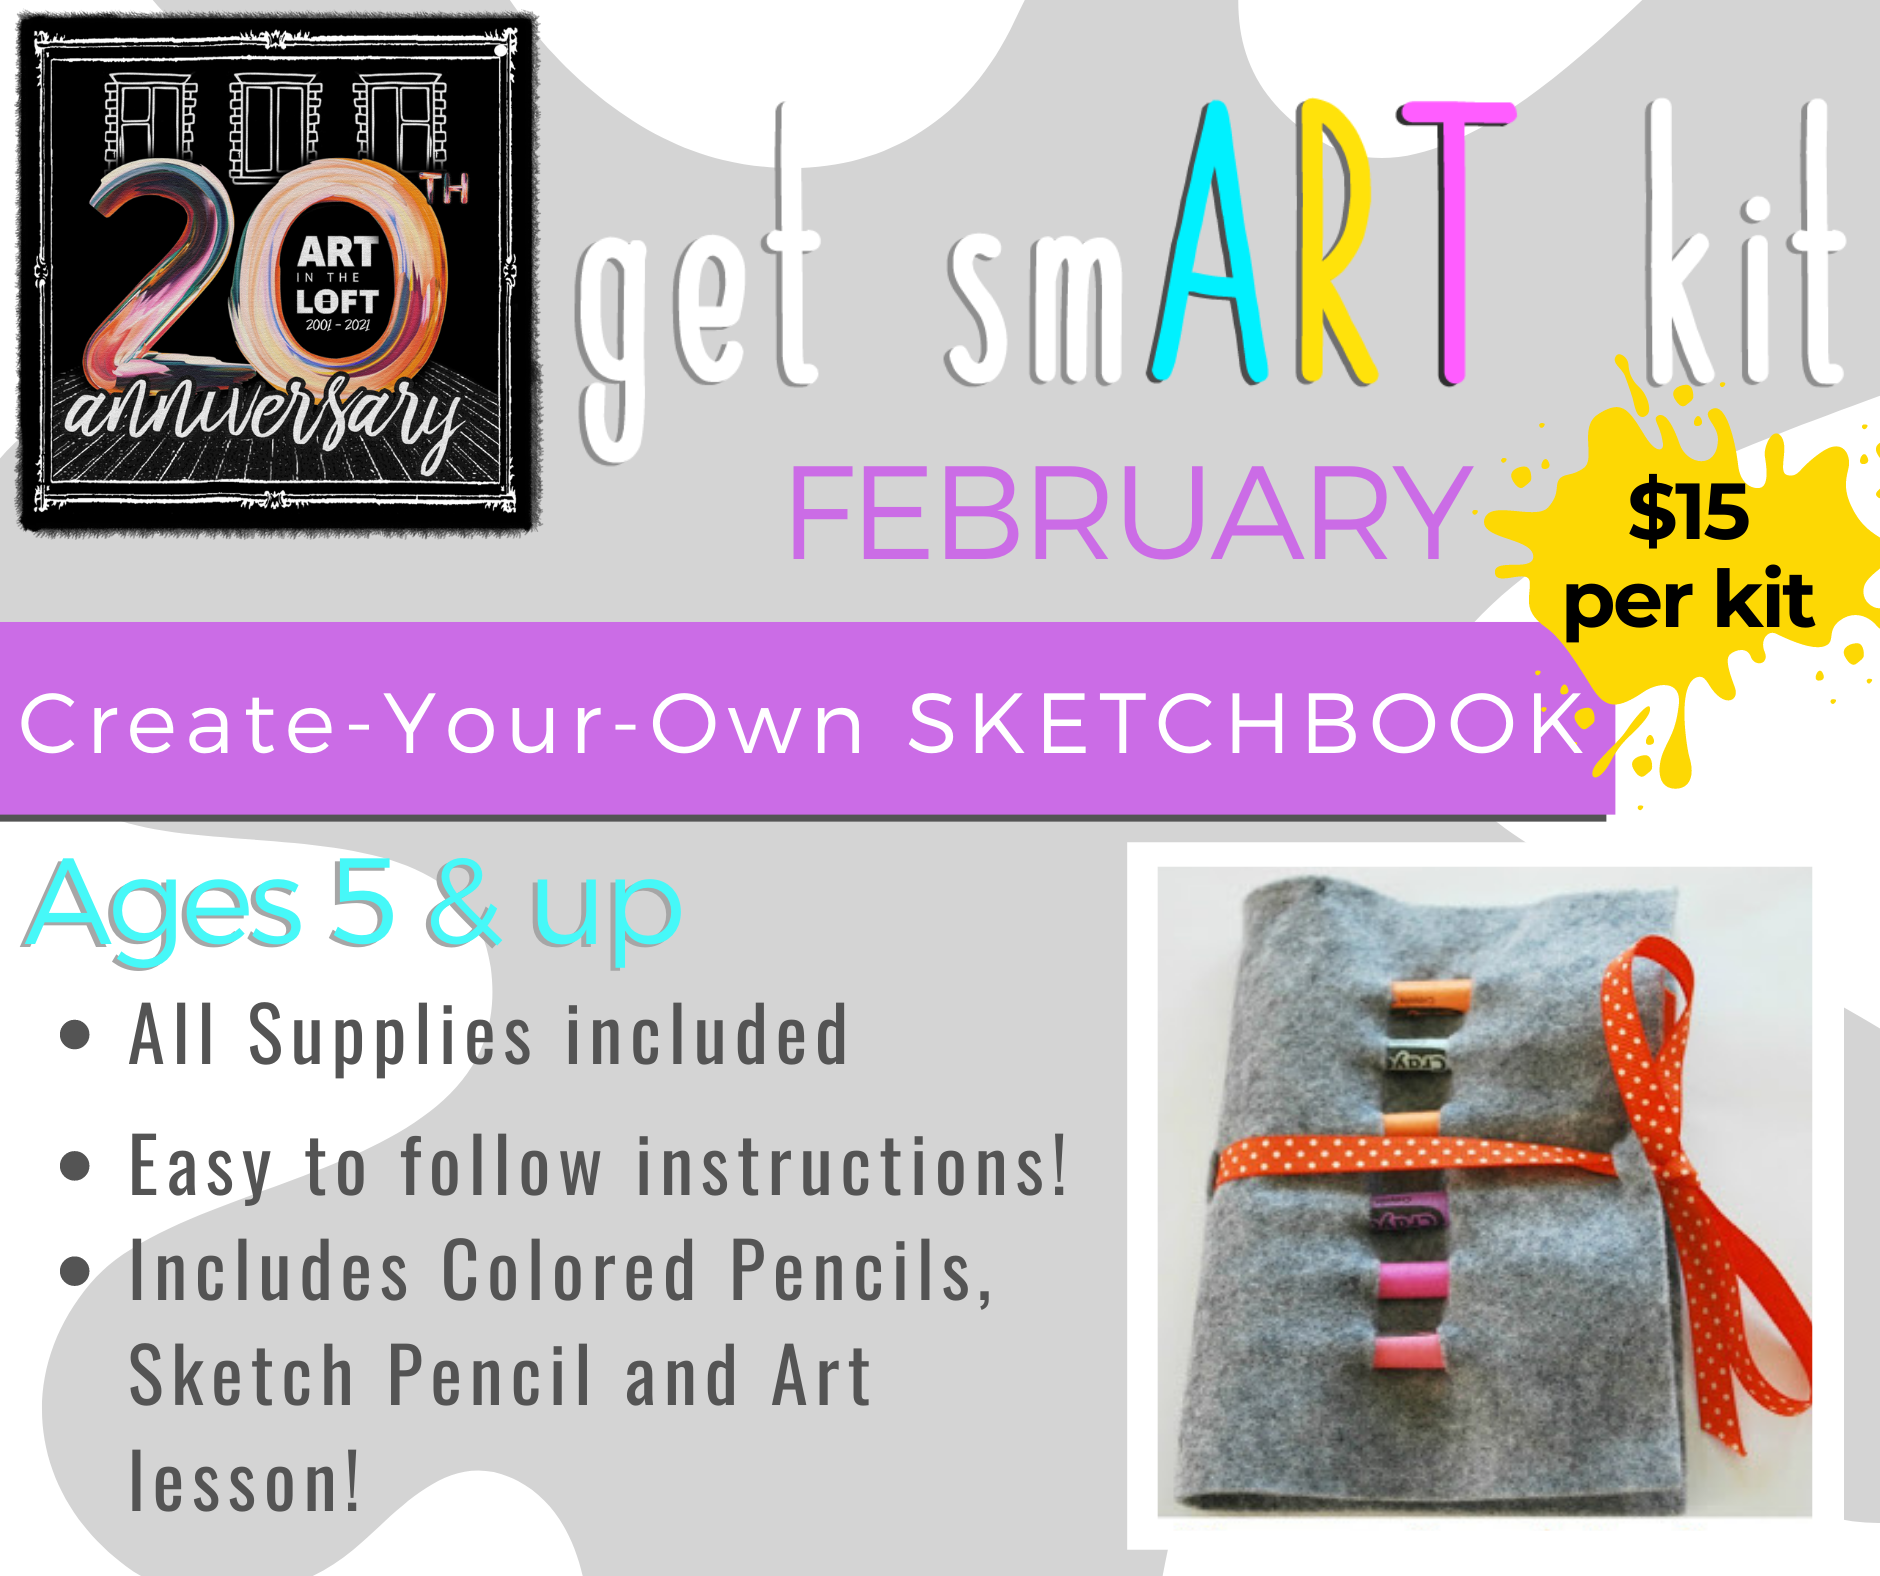 Build Your Own Art Supply Kits